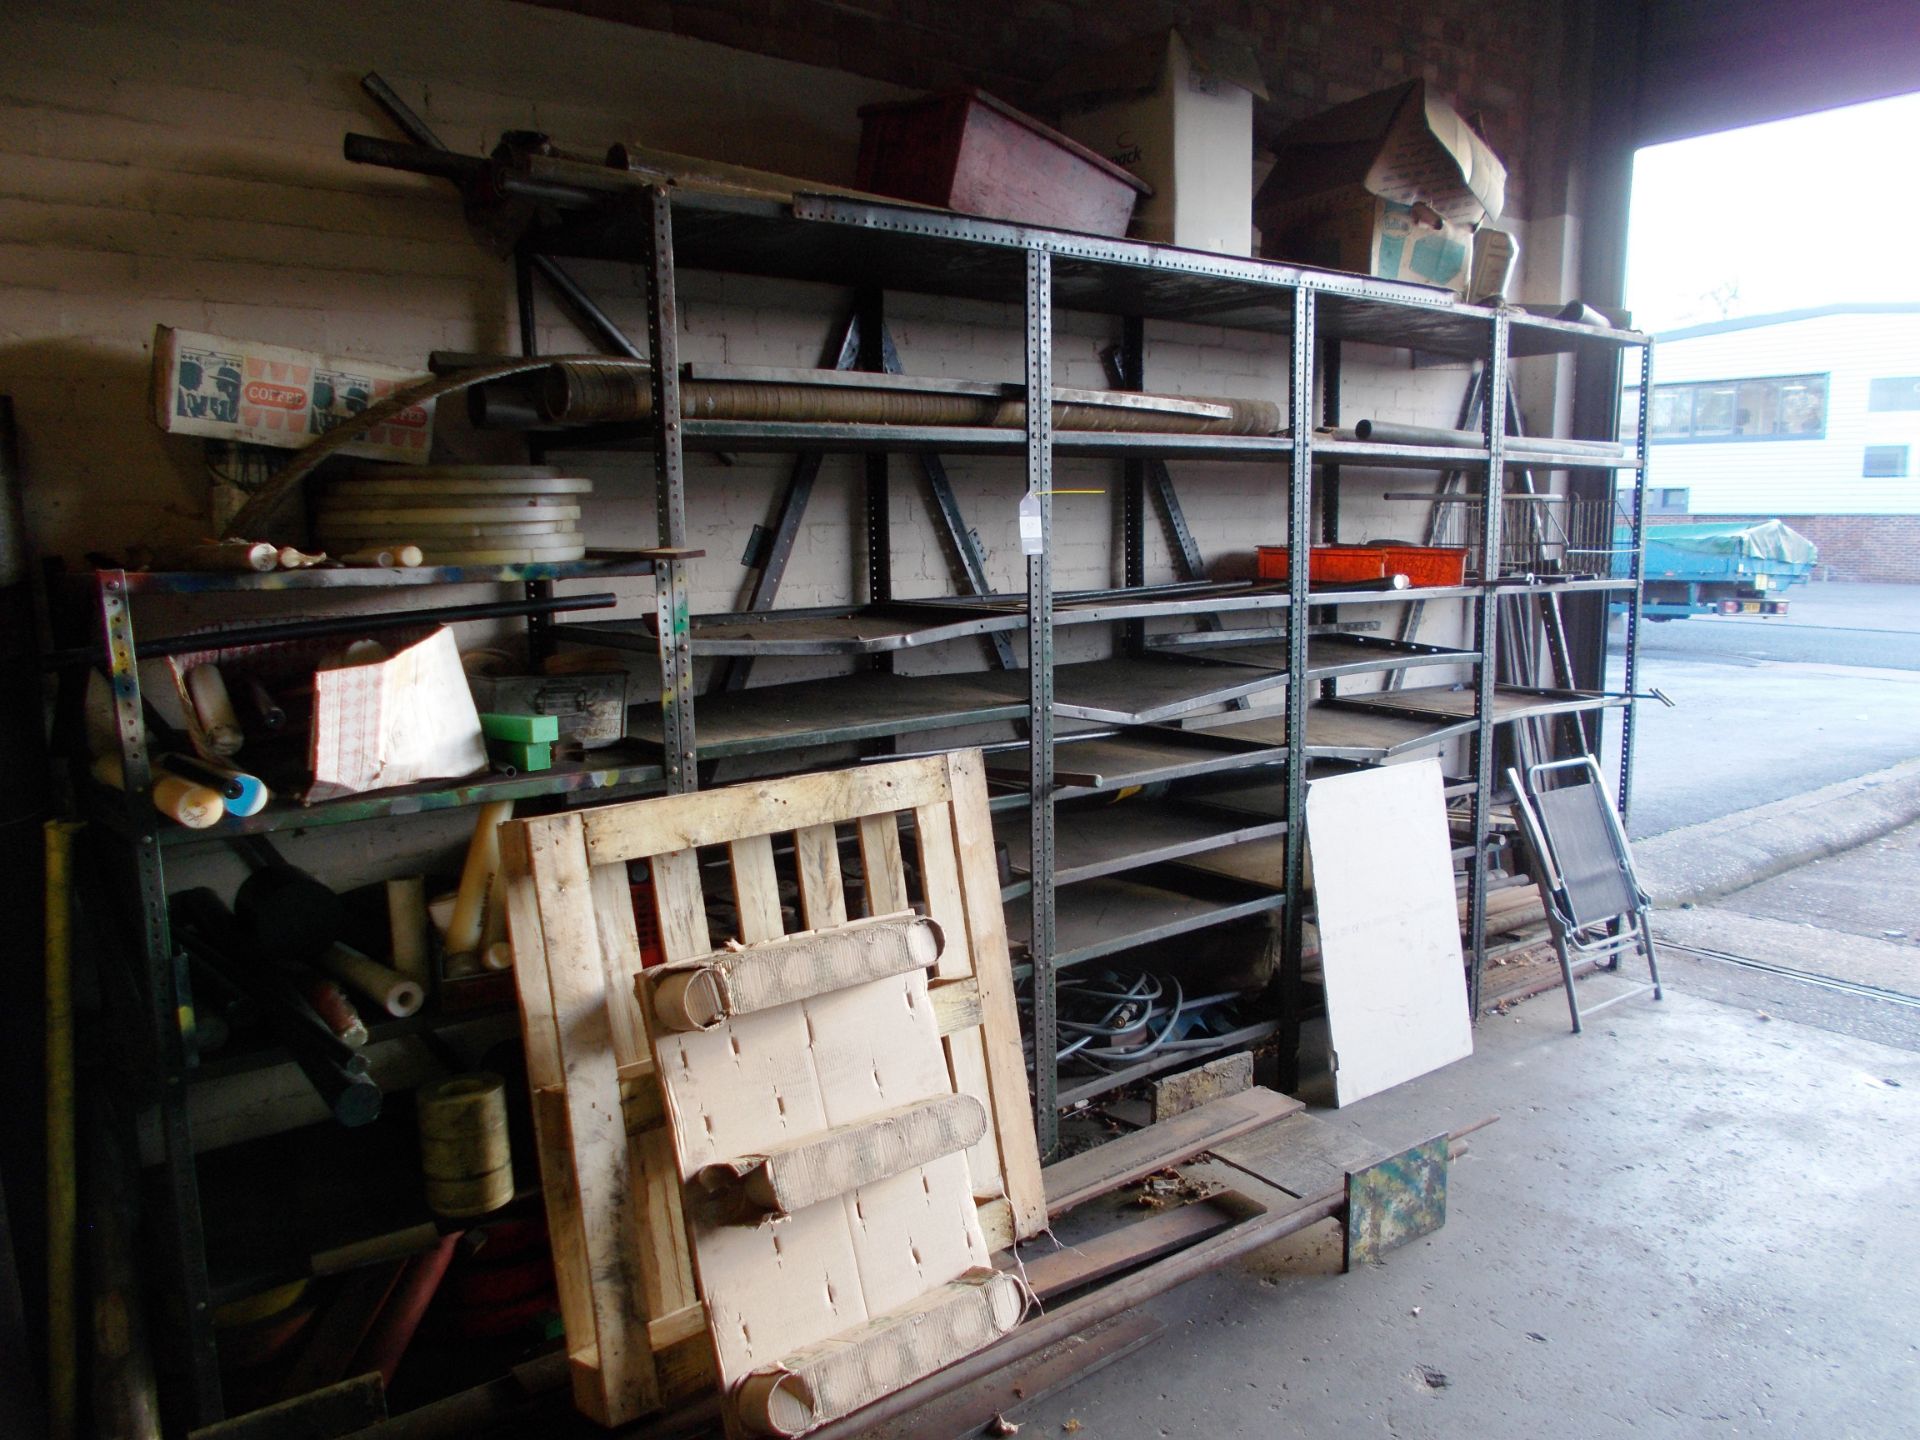 5 x Bays of steel shelving and contents of steel stock, nylon bar etc